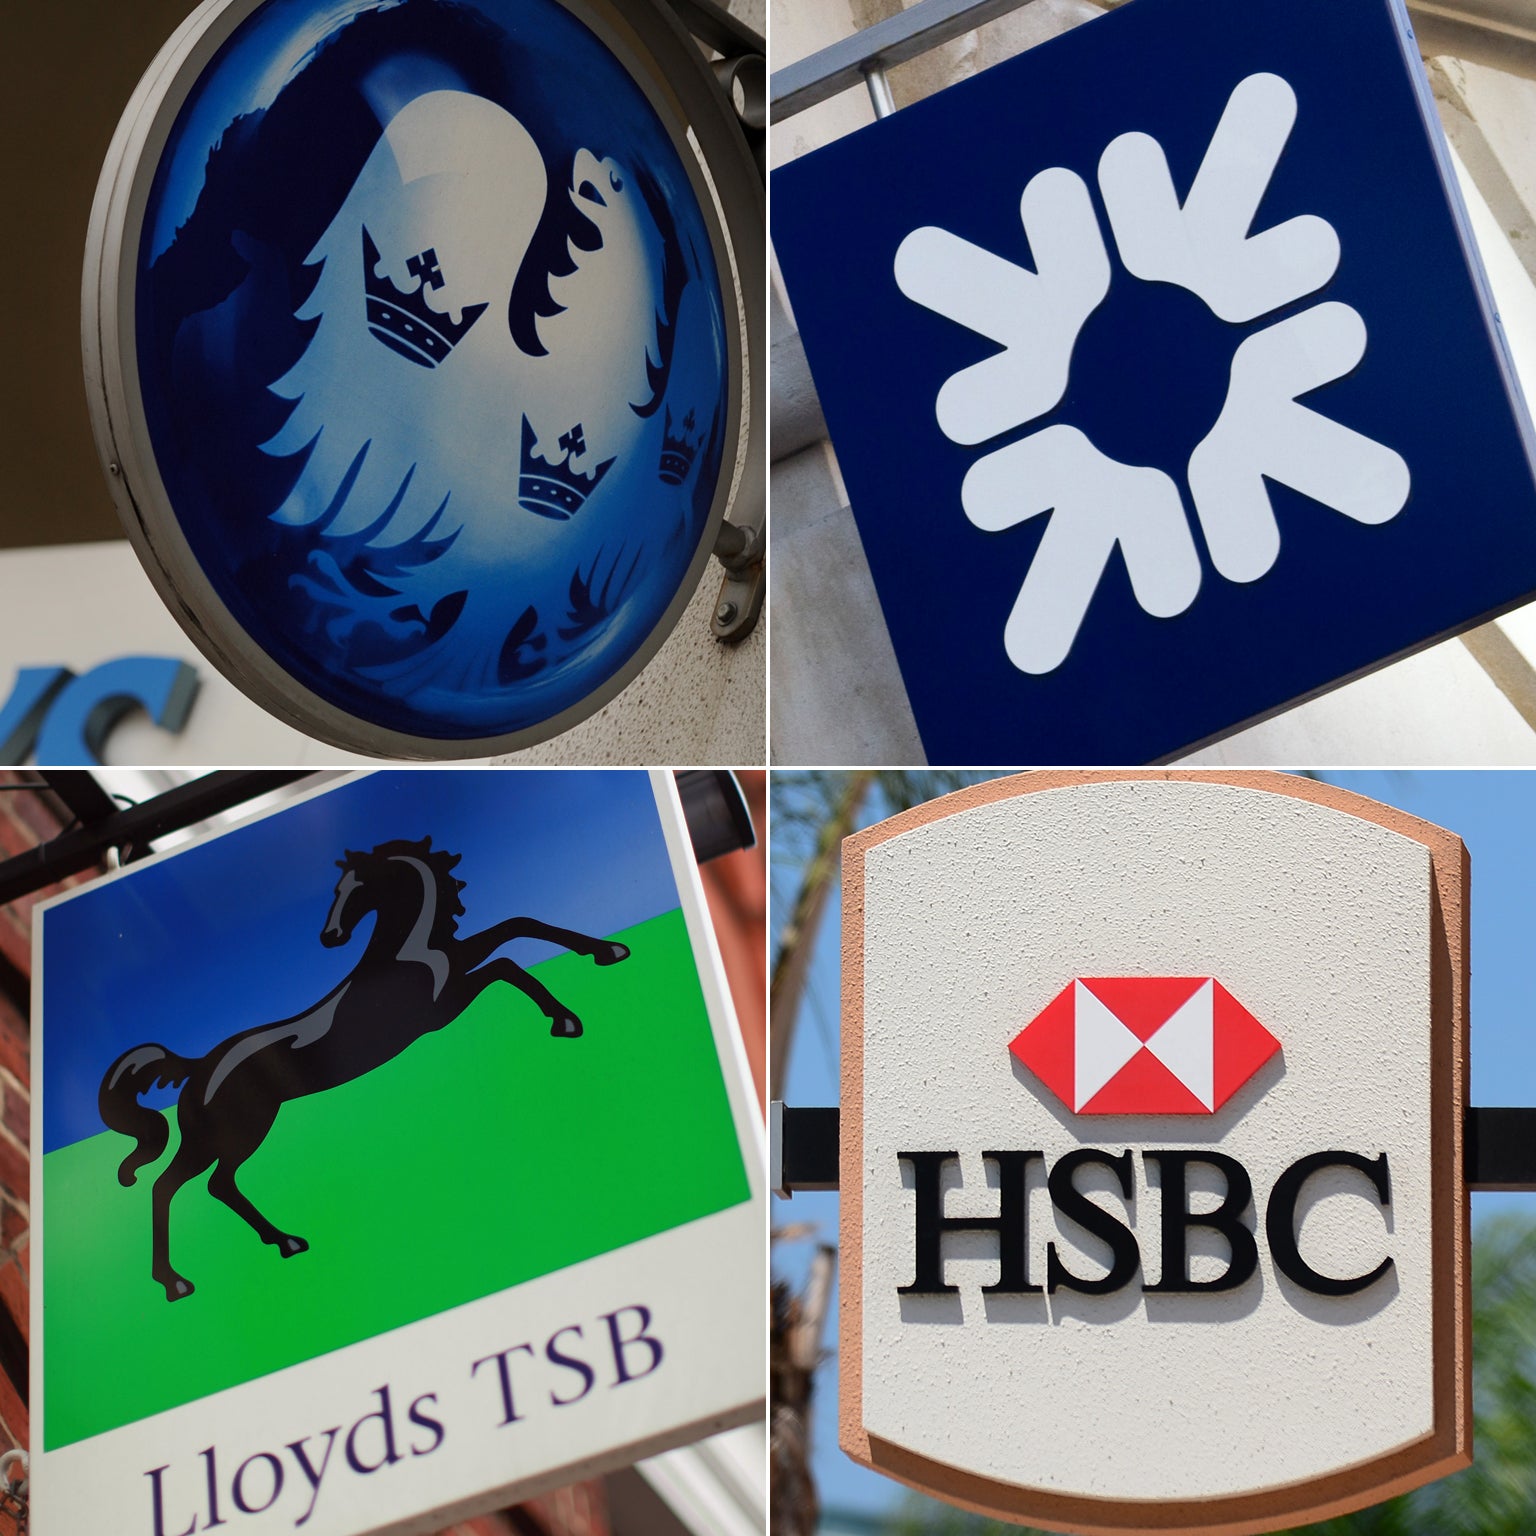 Barclays, RBS, Lloyds and HSBC 'broke rules' with sales of interest rate hedges to small businesses